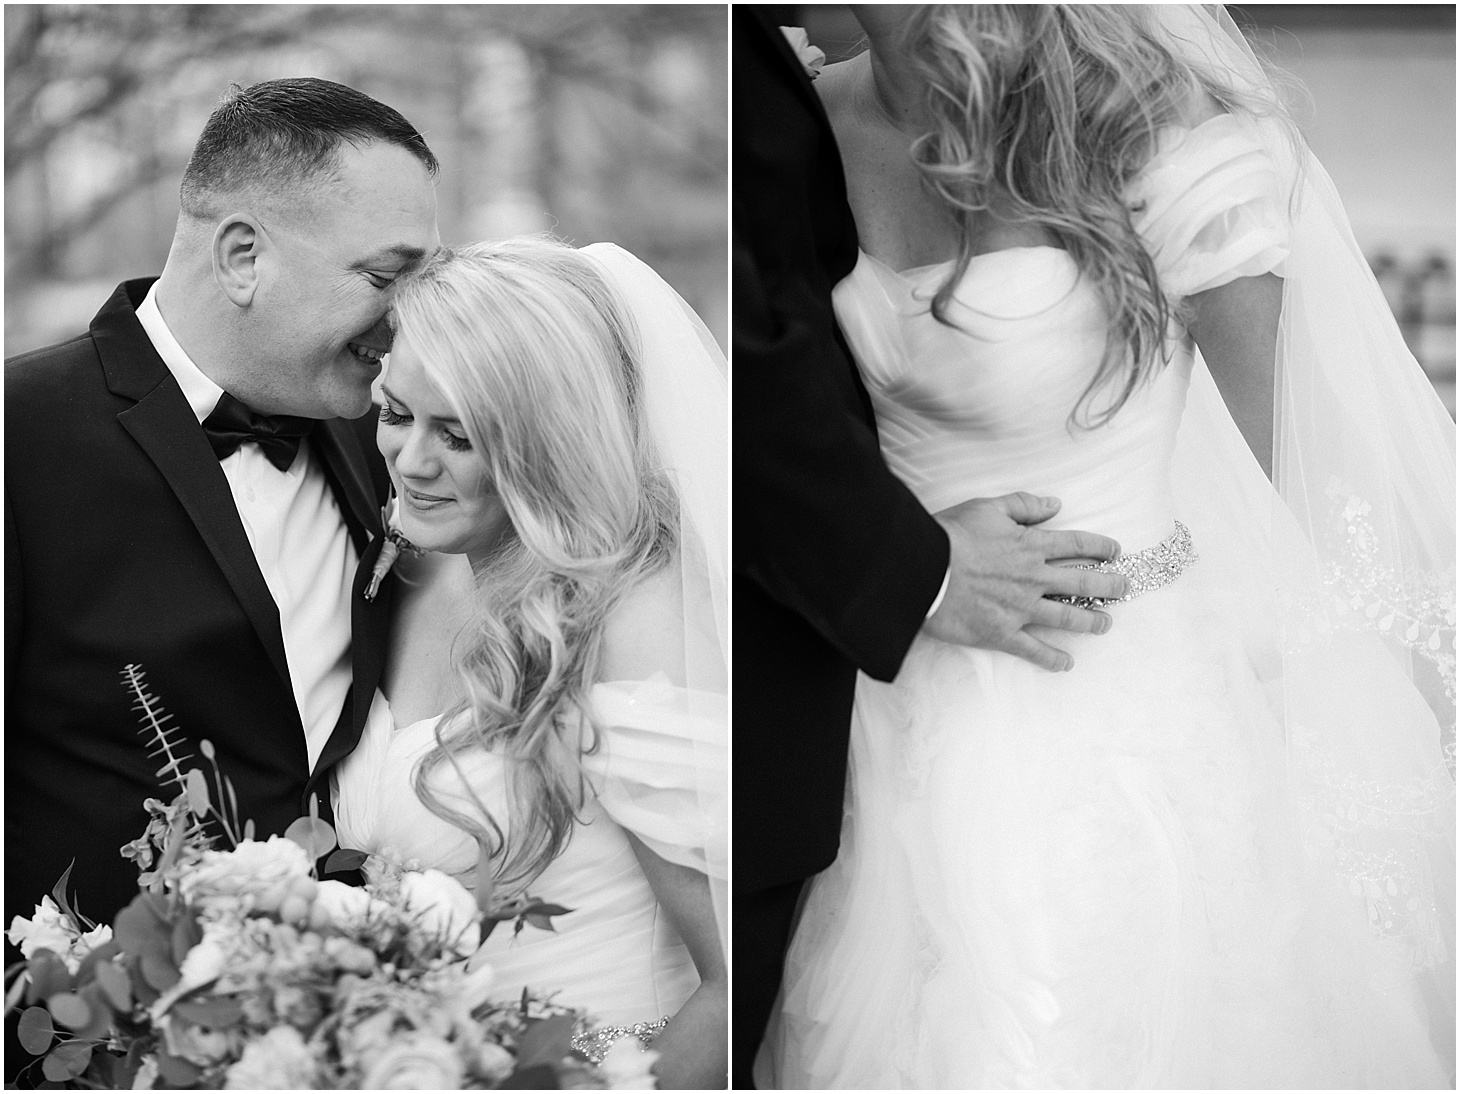 Wedding Portraits in LaFayette Square | Luxe Winter Wedding at the Army and Navy Club | Sarah Bradshaw Photography | Washington DC Wedding Photographer